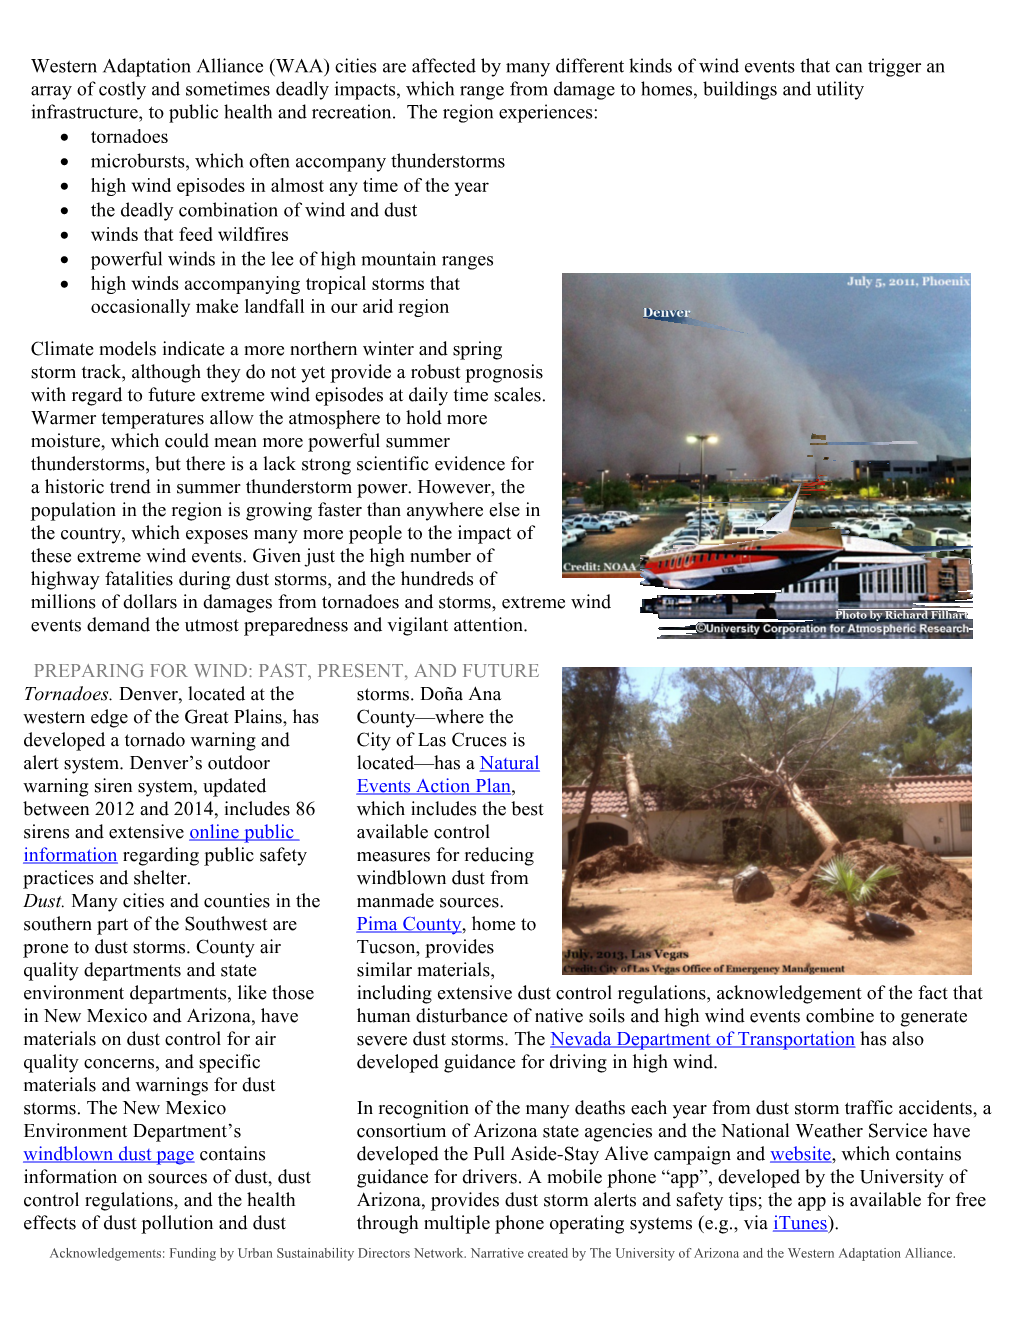 Western Adaptation Alliance (WAA) Cities Are Affected by Many Different Kinds of Wind Events